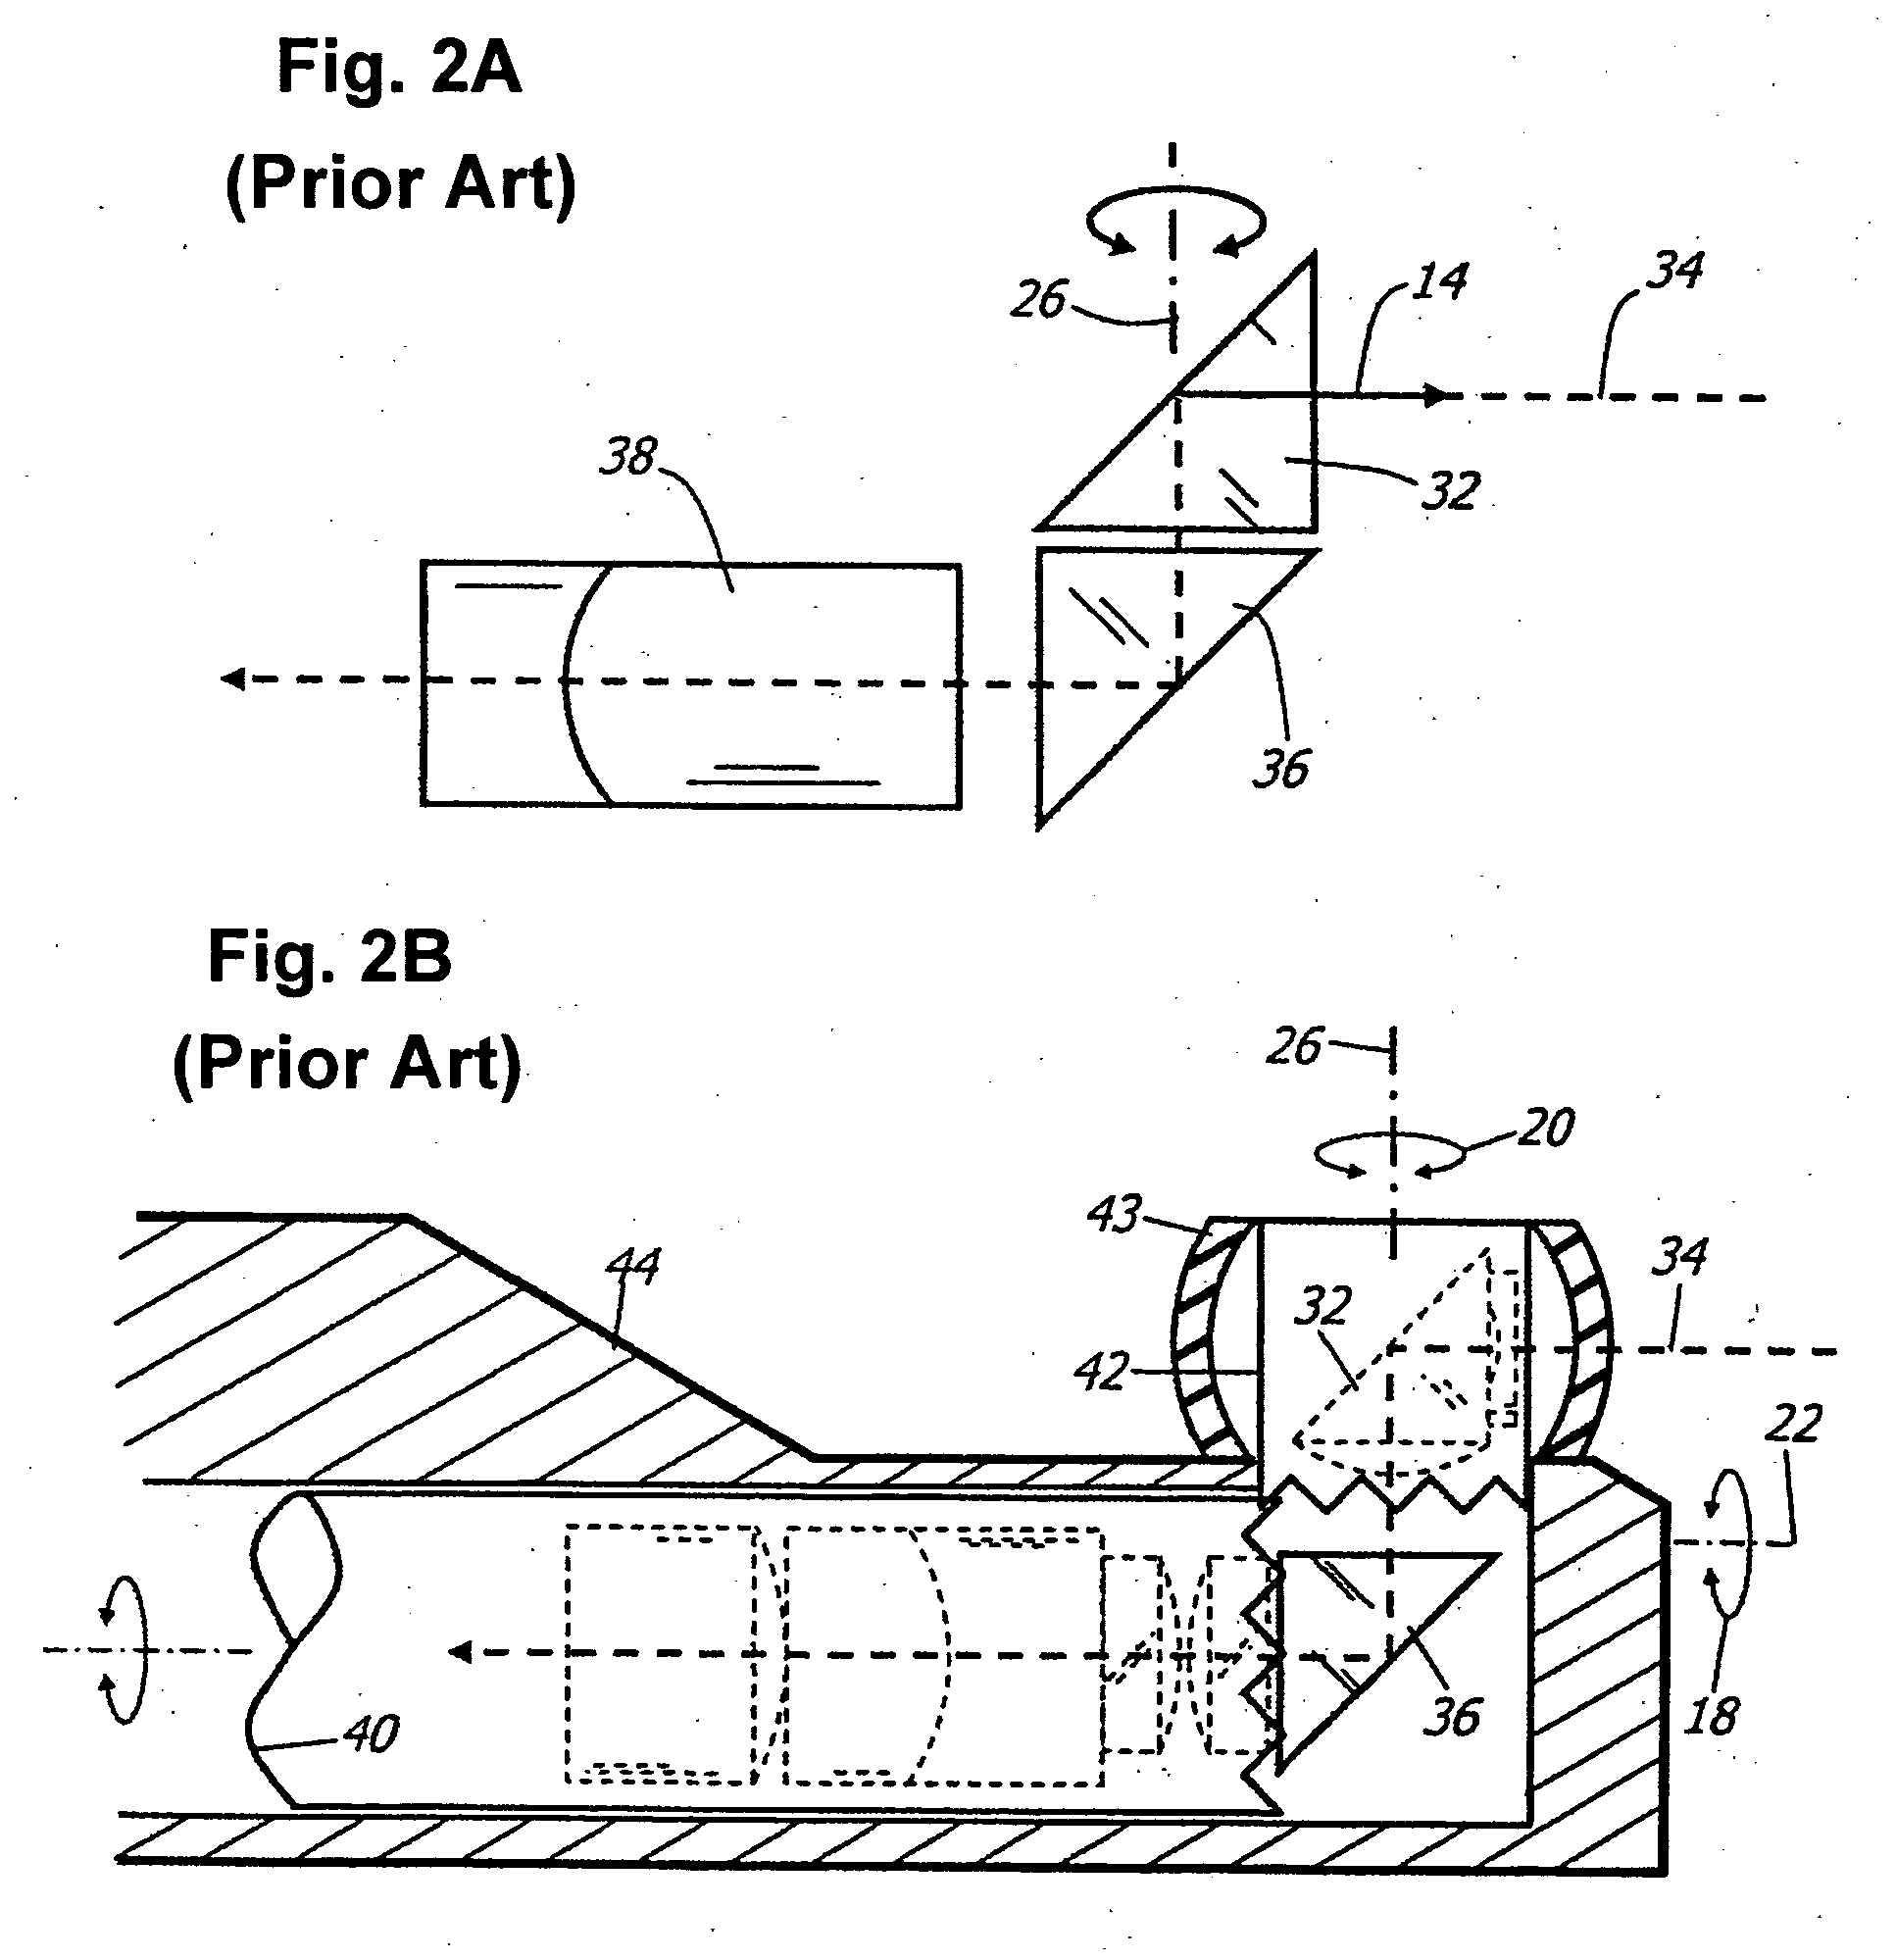 Variable direction of view instrument with distal image sensor